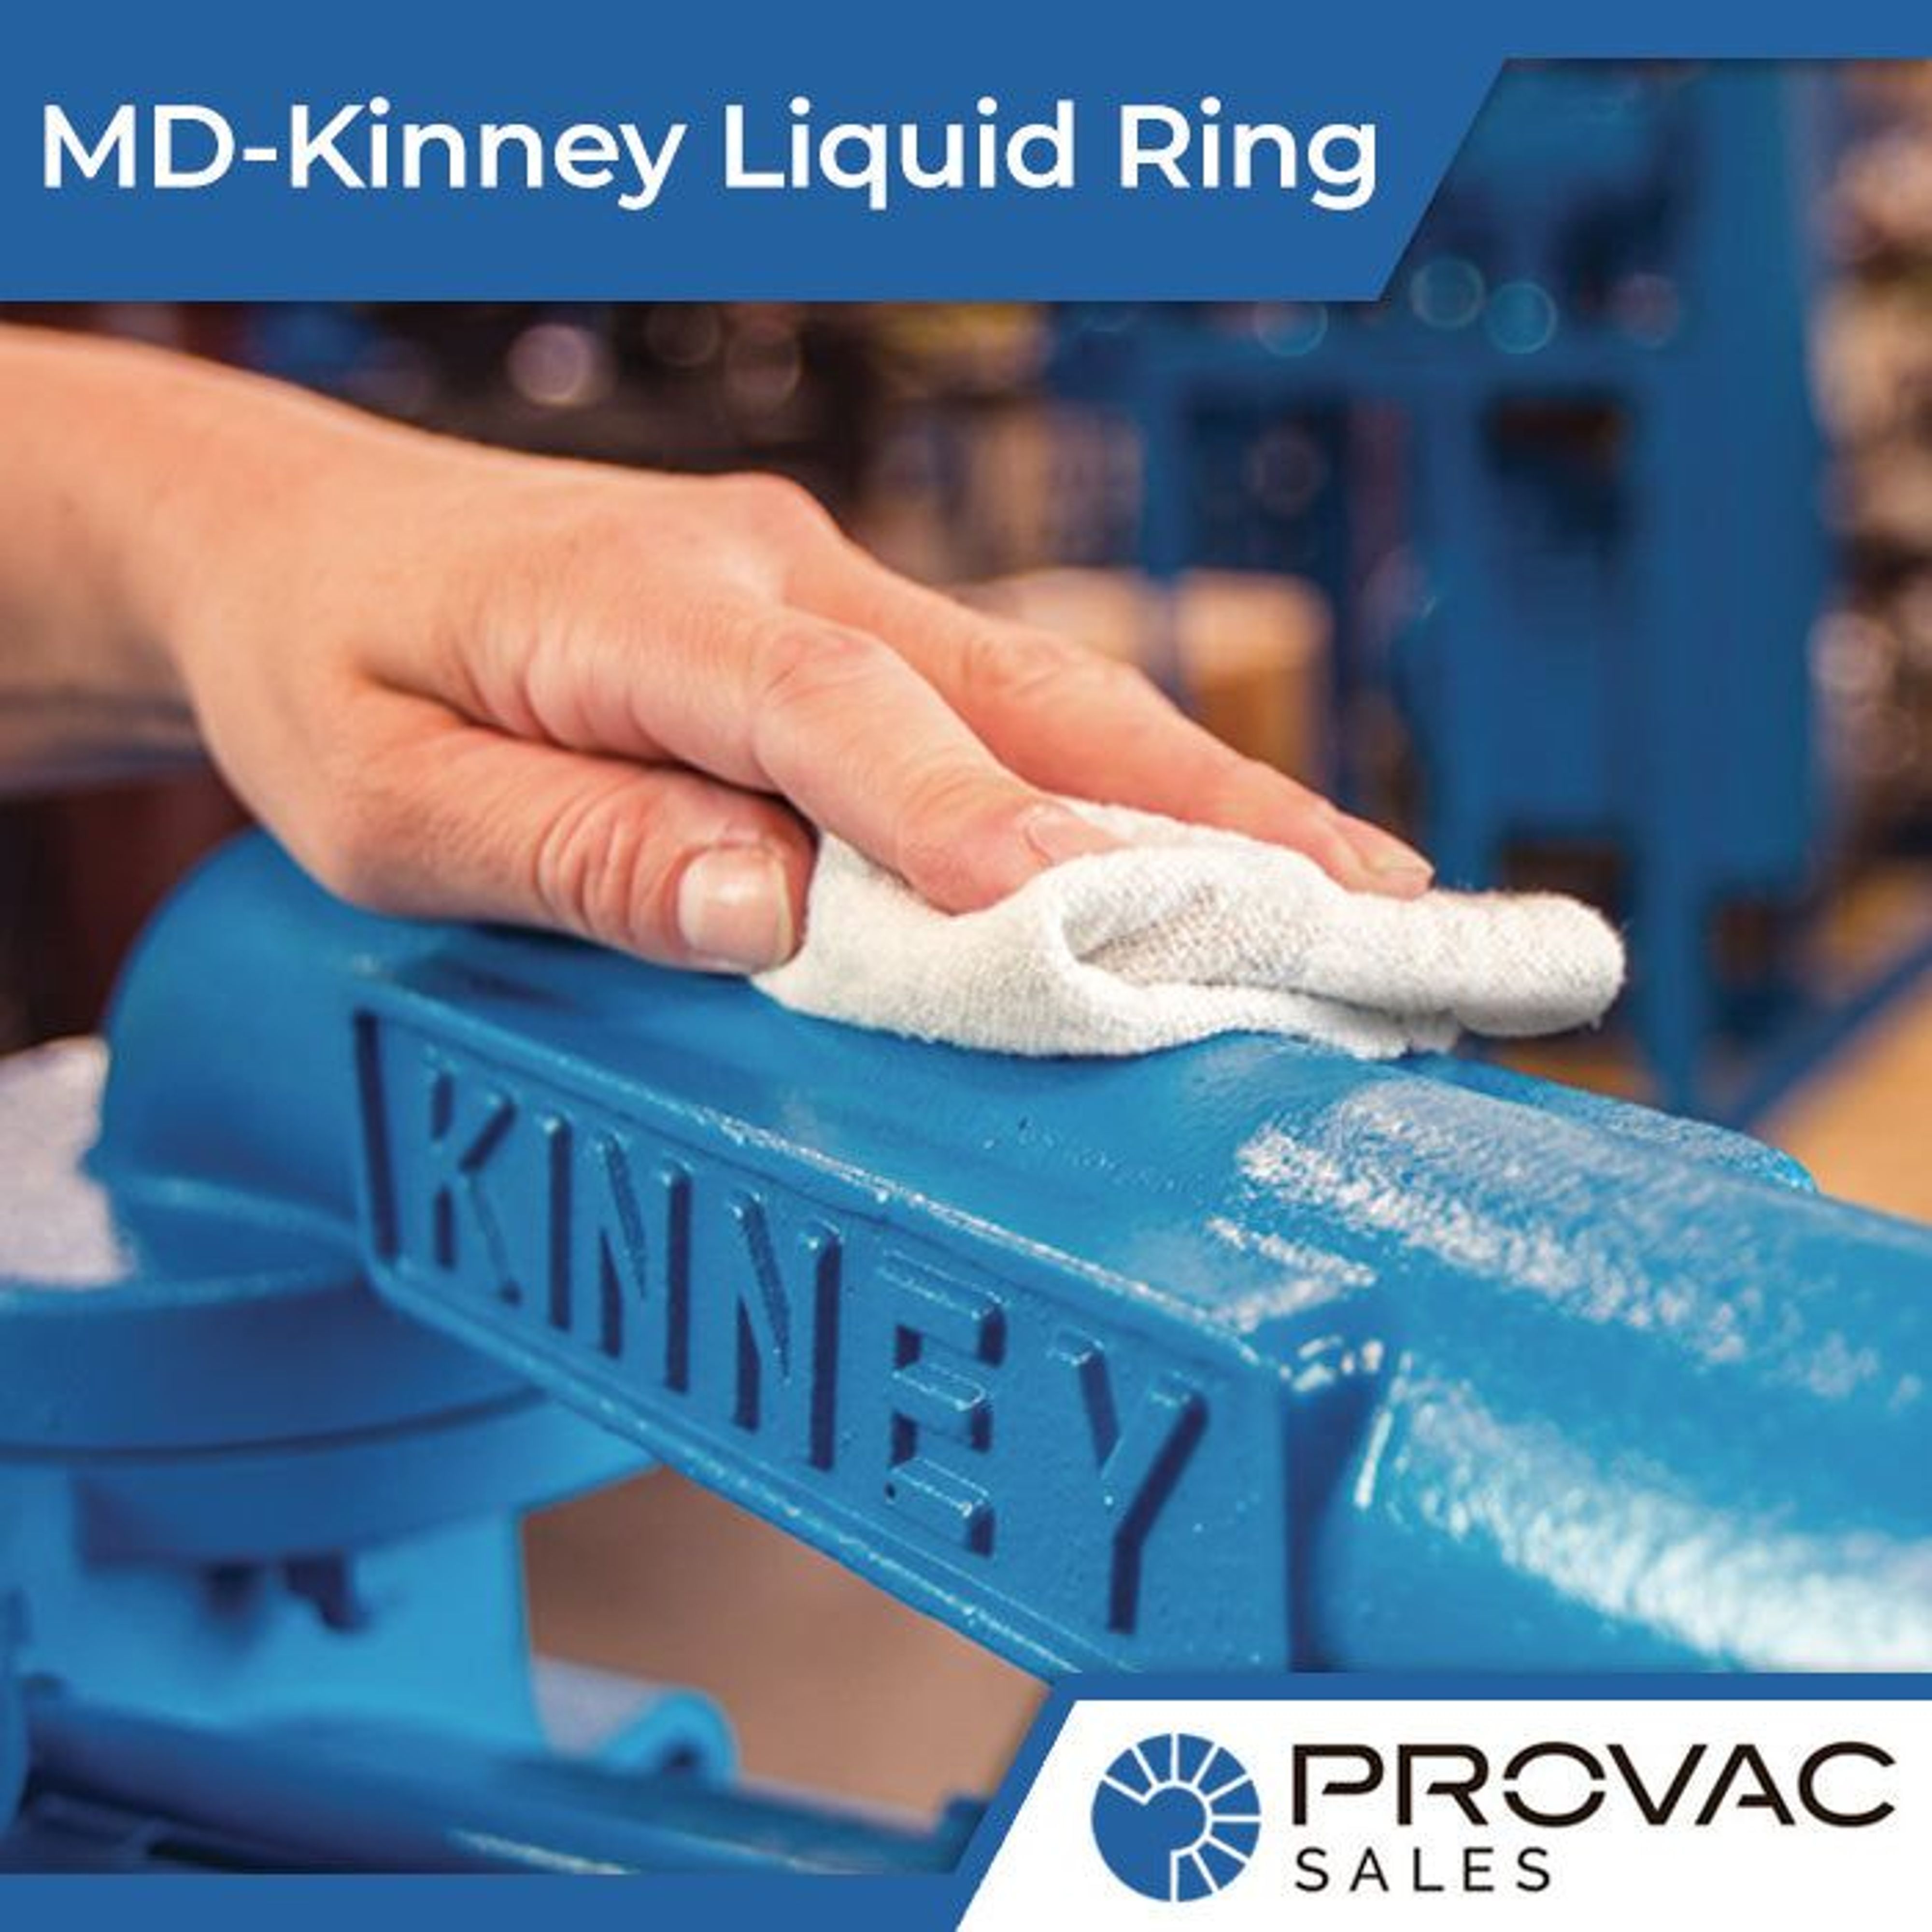 MD-Kinney Liquid Ring Pumps: How do they work? Background